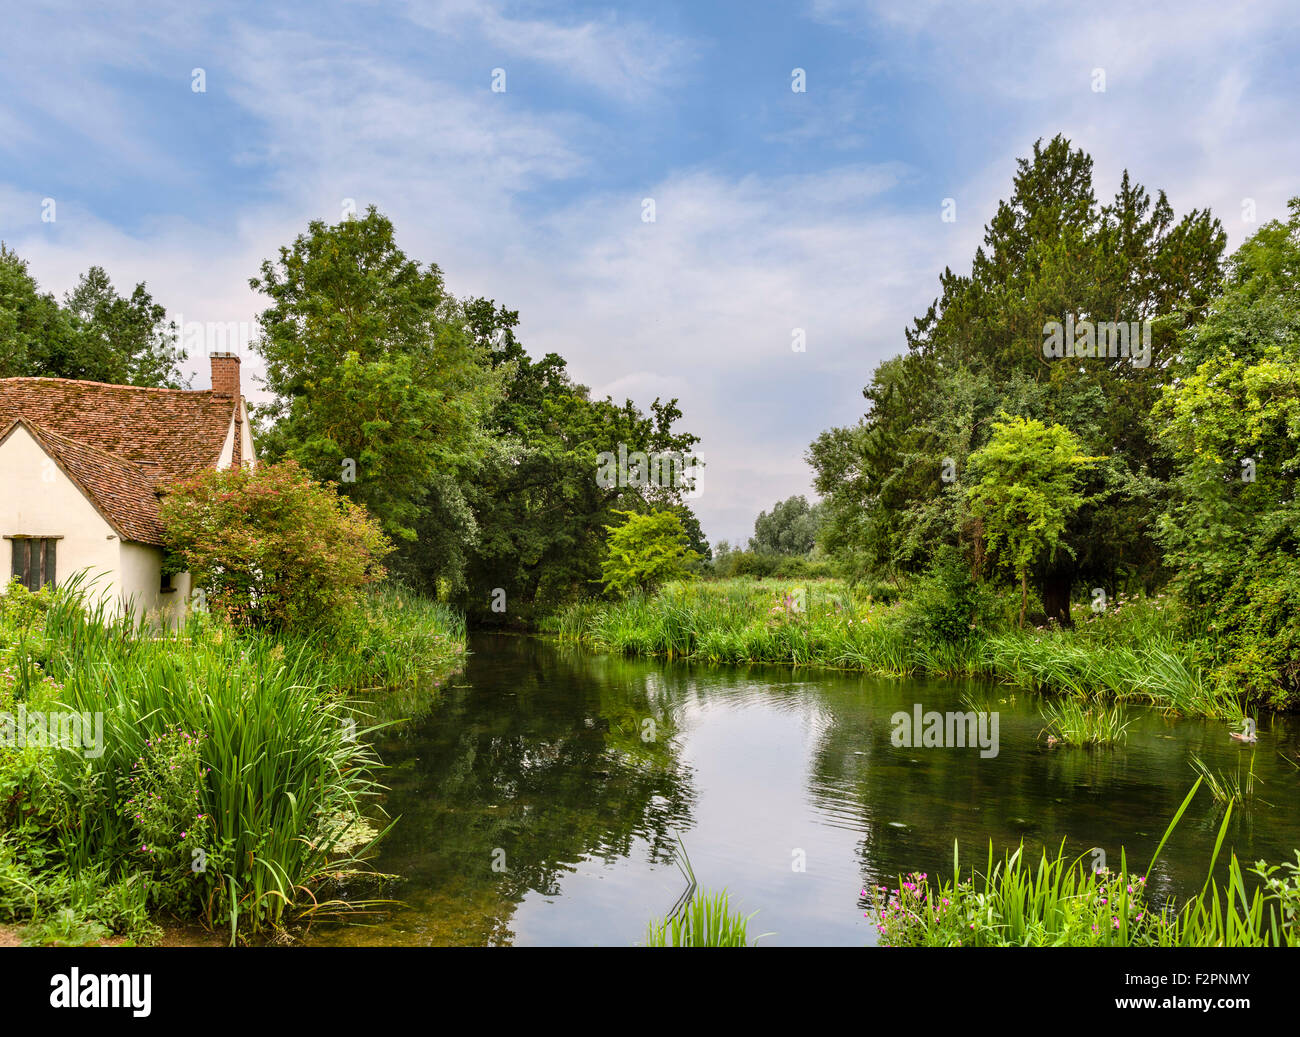 View featured in Constable’s painting The Hay Wain, with Willy Lott’s Cottage on  left, Flatford Mill, East Bergholt, Essex, UK Stock Photo